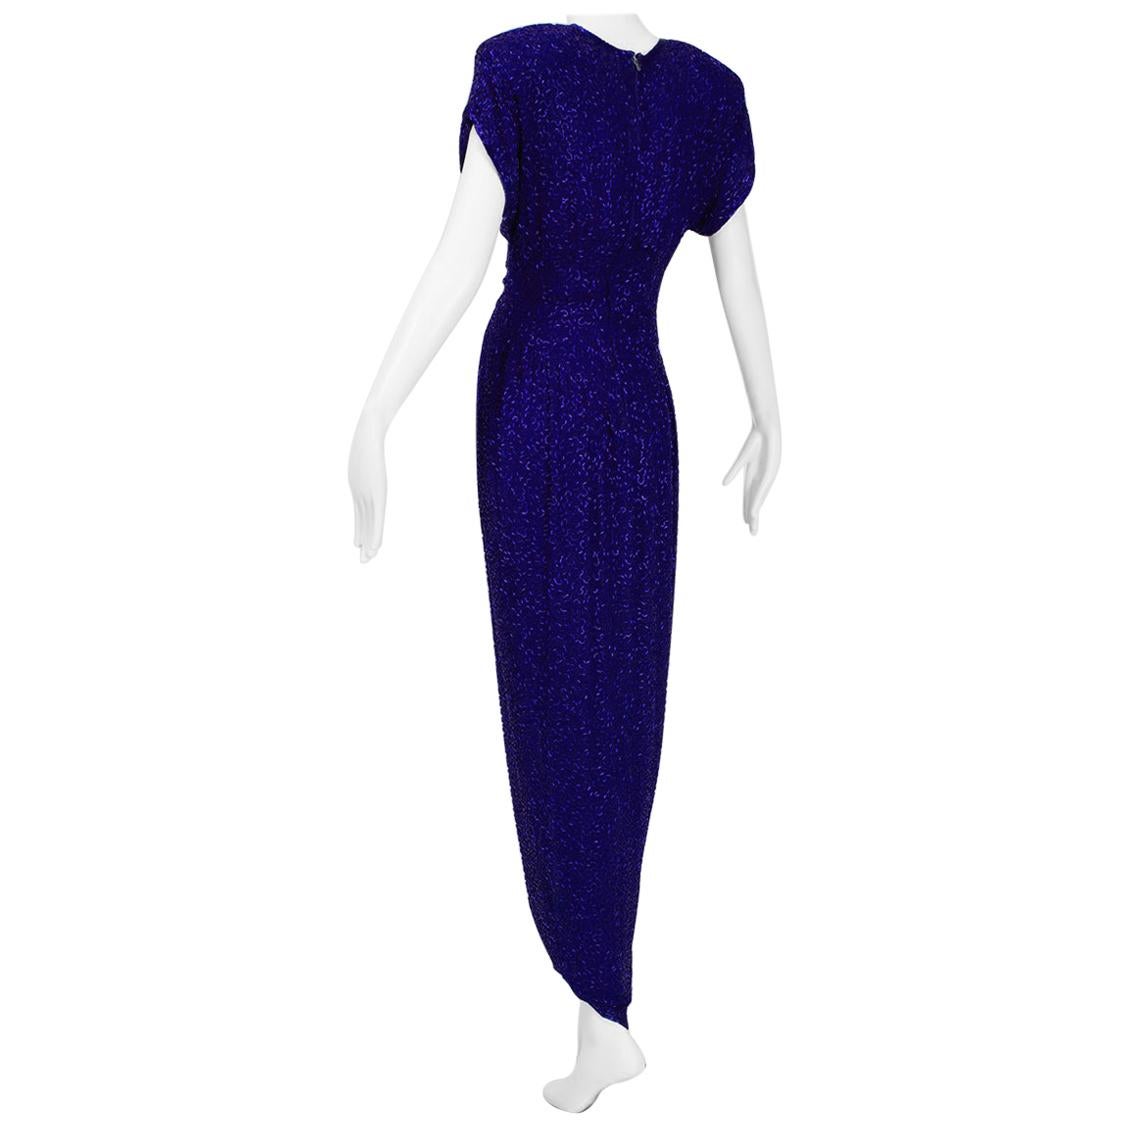 Violet Art Deco Beaded Hobble Gown with Pointed Waterfall Skirt - Small, 1980s